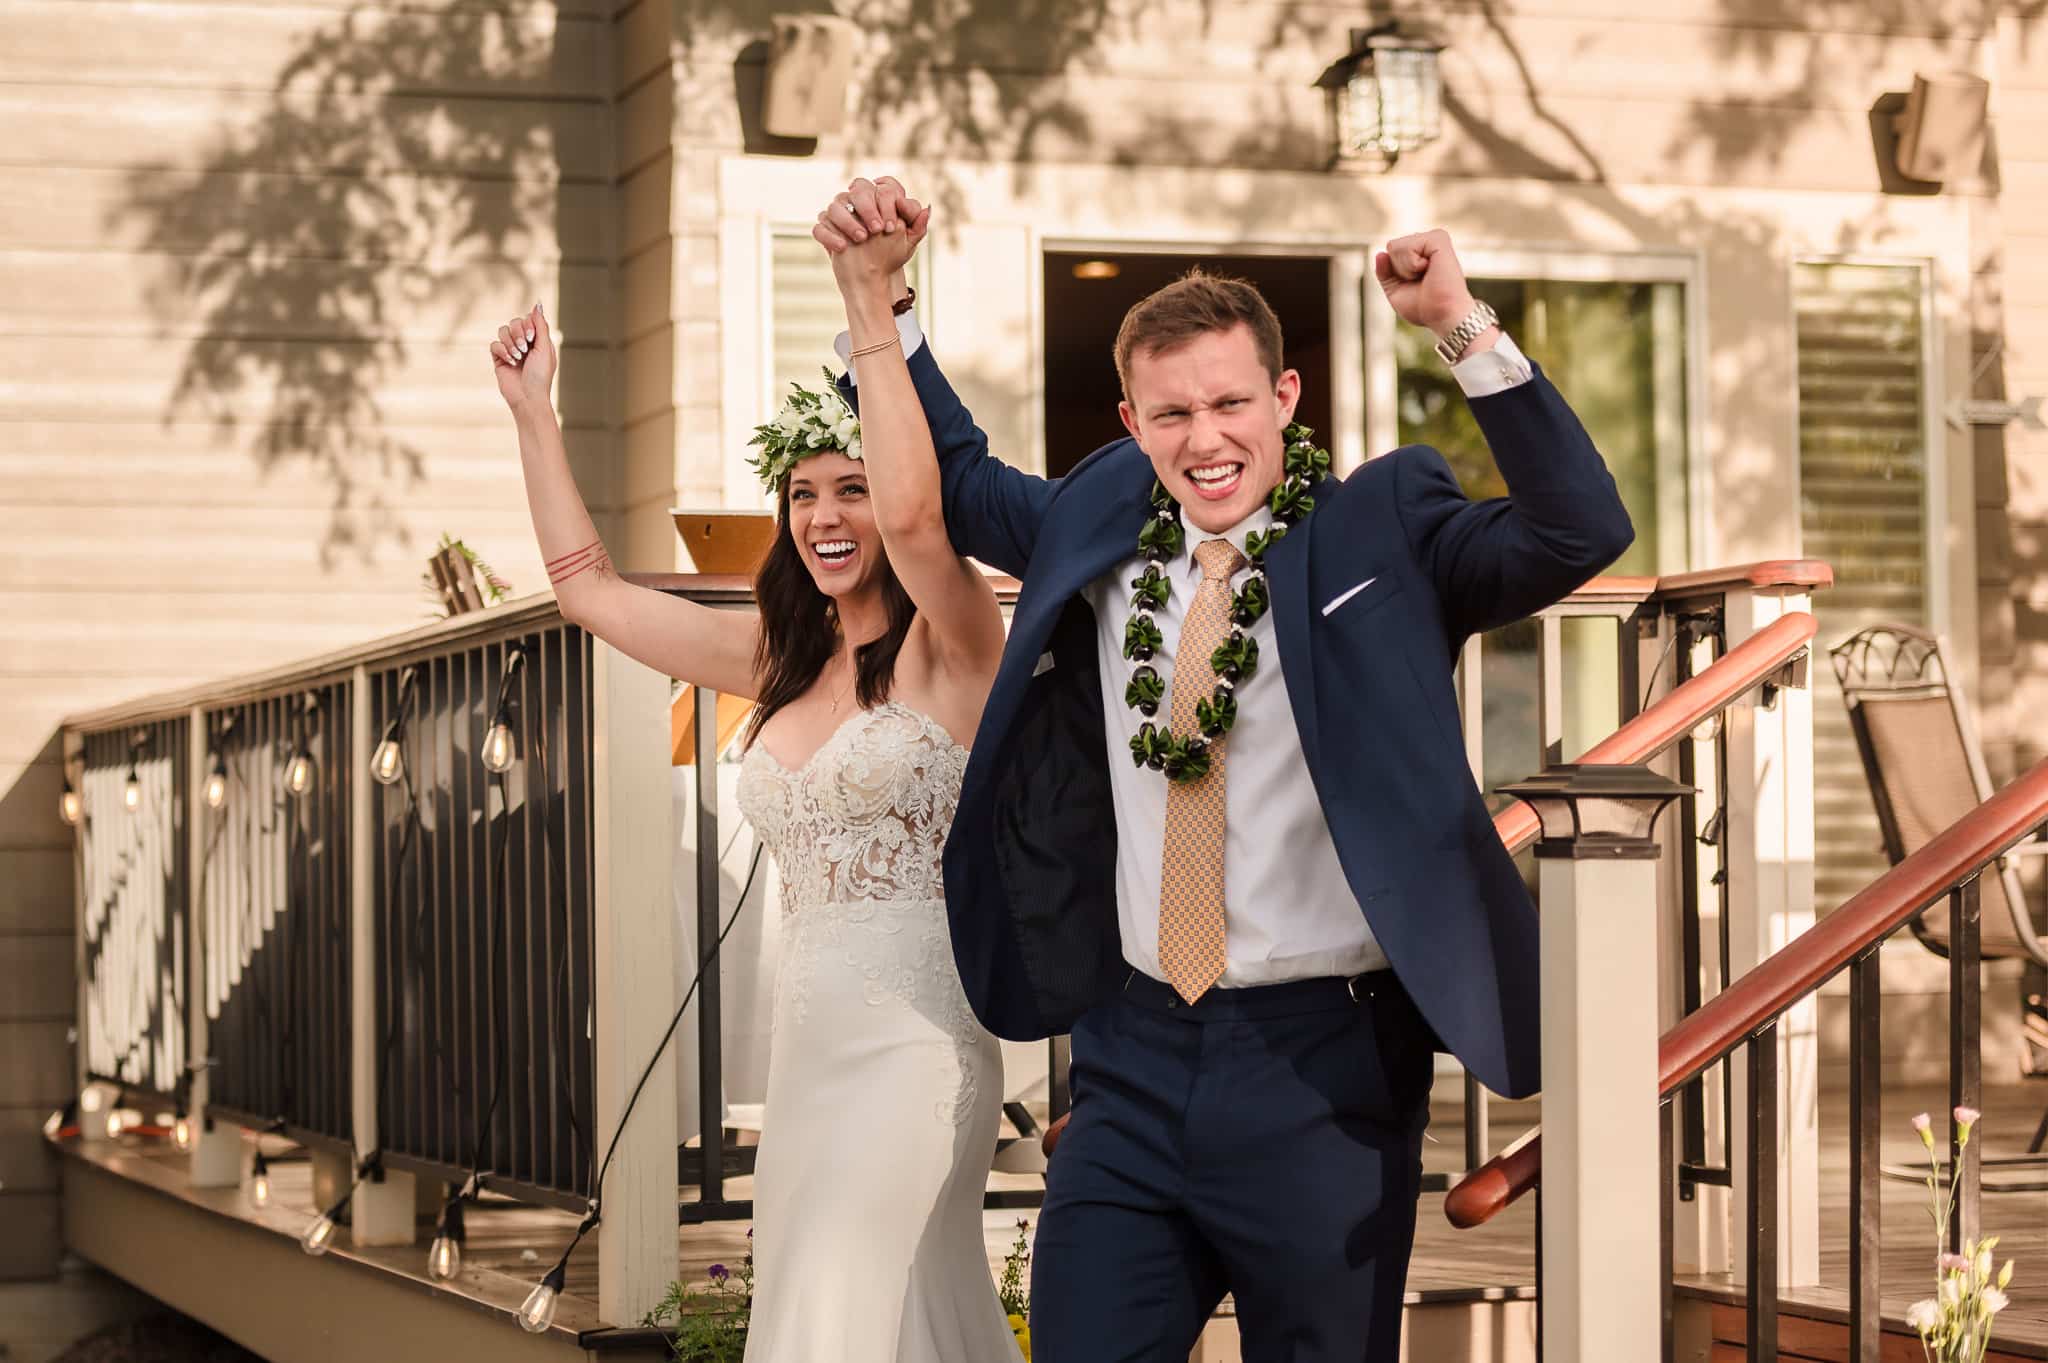 The bride and groom raise their arms together in victory as they make their grand entrance to the reception.